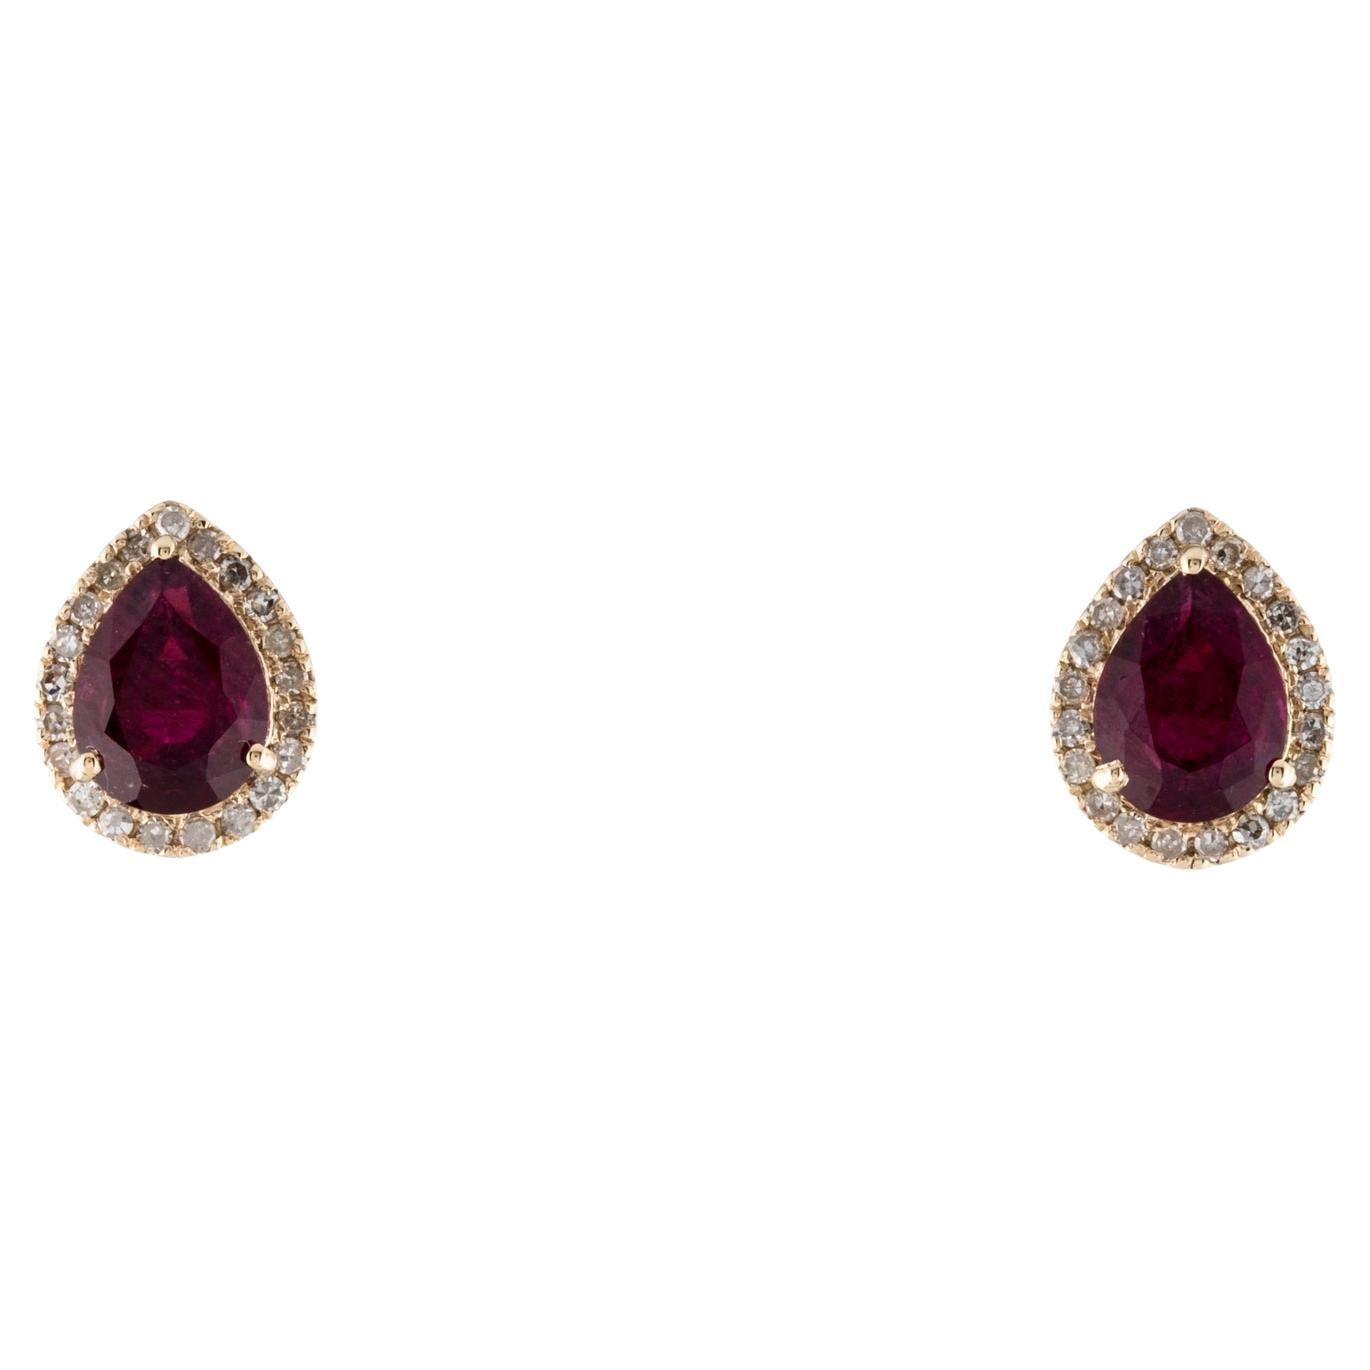 14K Yellow Gold Stud Earrings with 2.25ct Pear-Shaped Tourmaline and Diamond For Sale